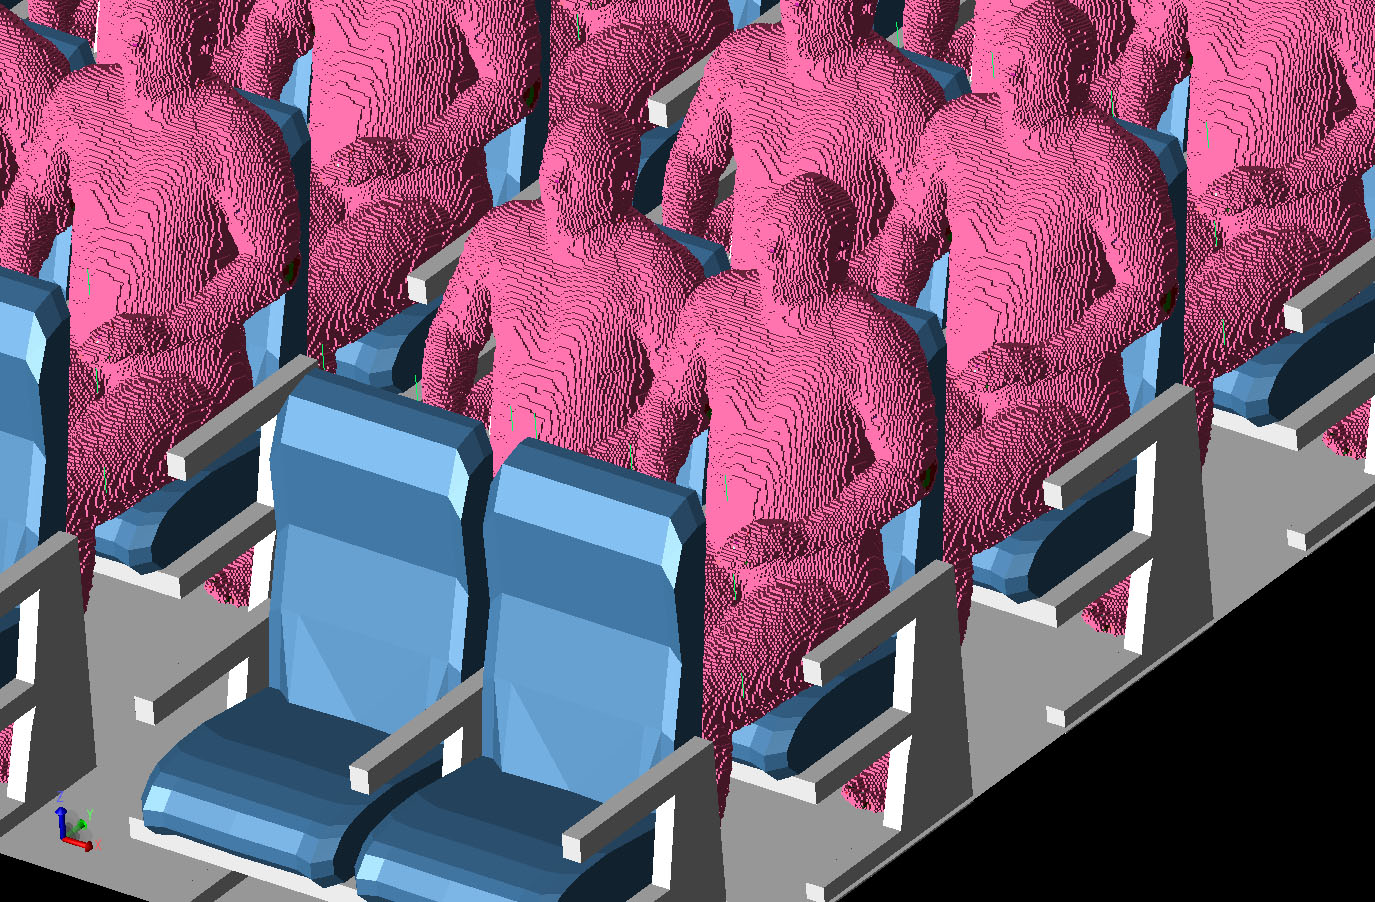 Figure 4Three-dimensional view of the aircraft cabin with some of the positioned VariPose men in the seats. All seats in the aircraft except the first and last rows have the men seated in them.